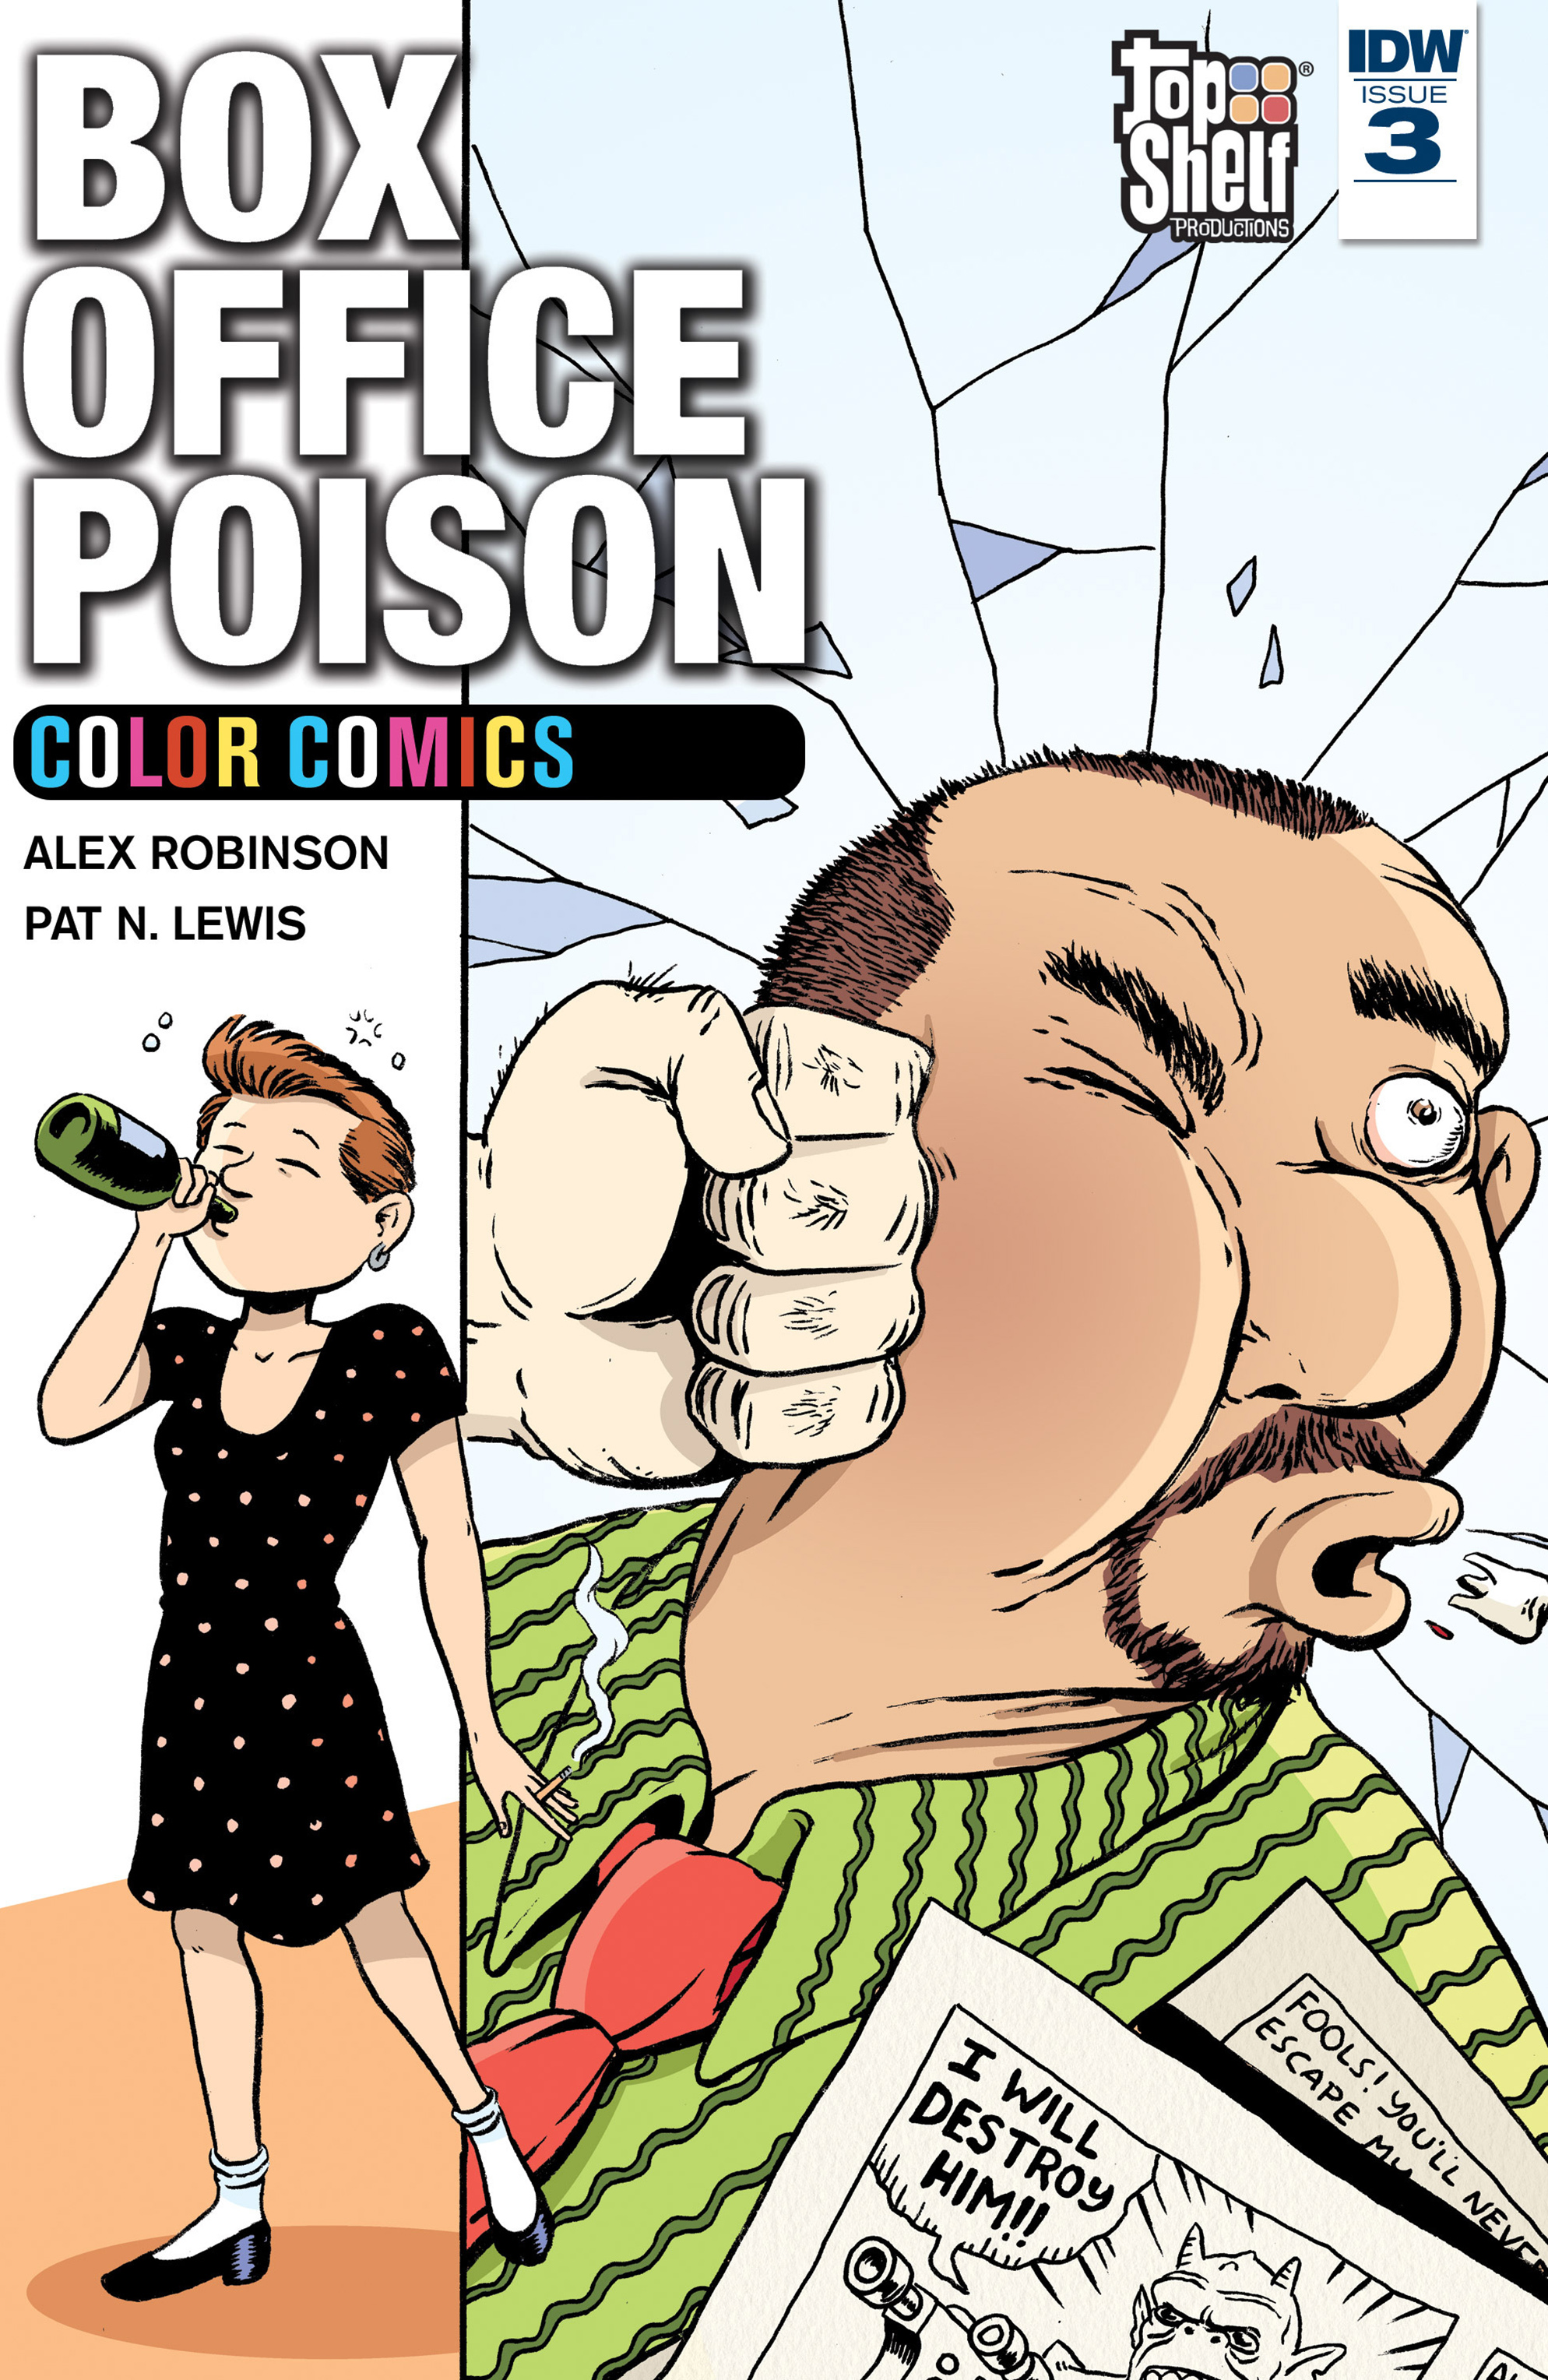 Box Office Poison Color Comics (2017-): Chapter 3 - Page 1